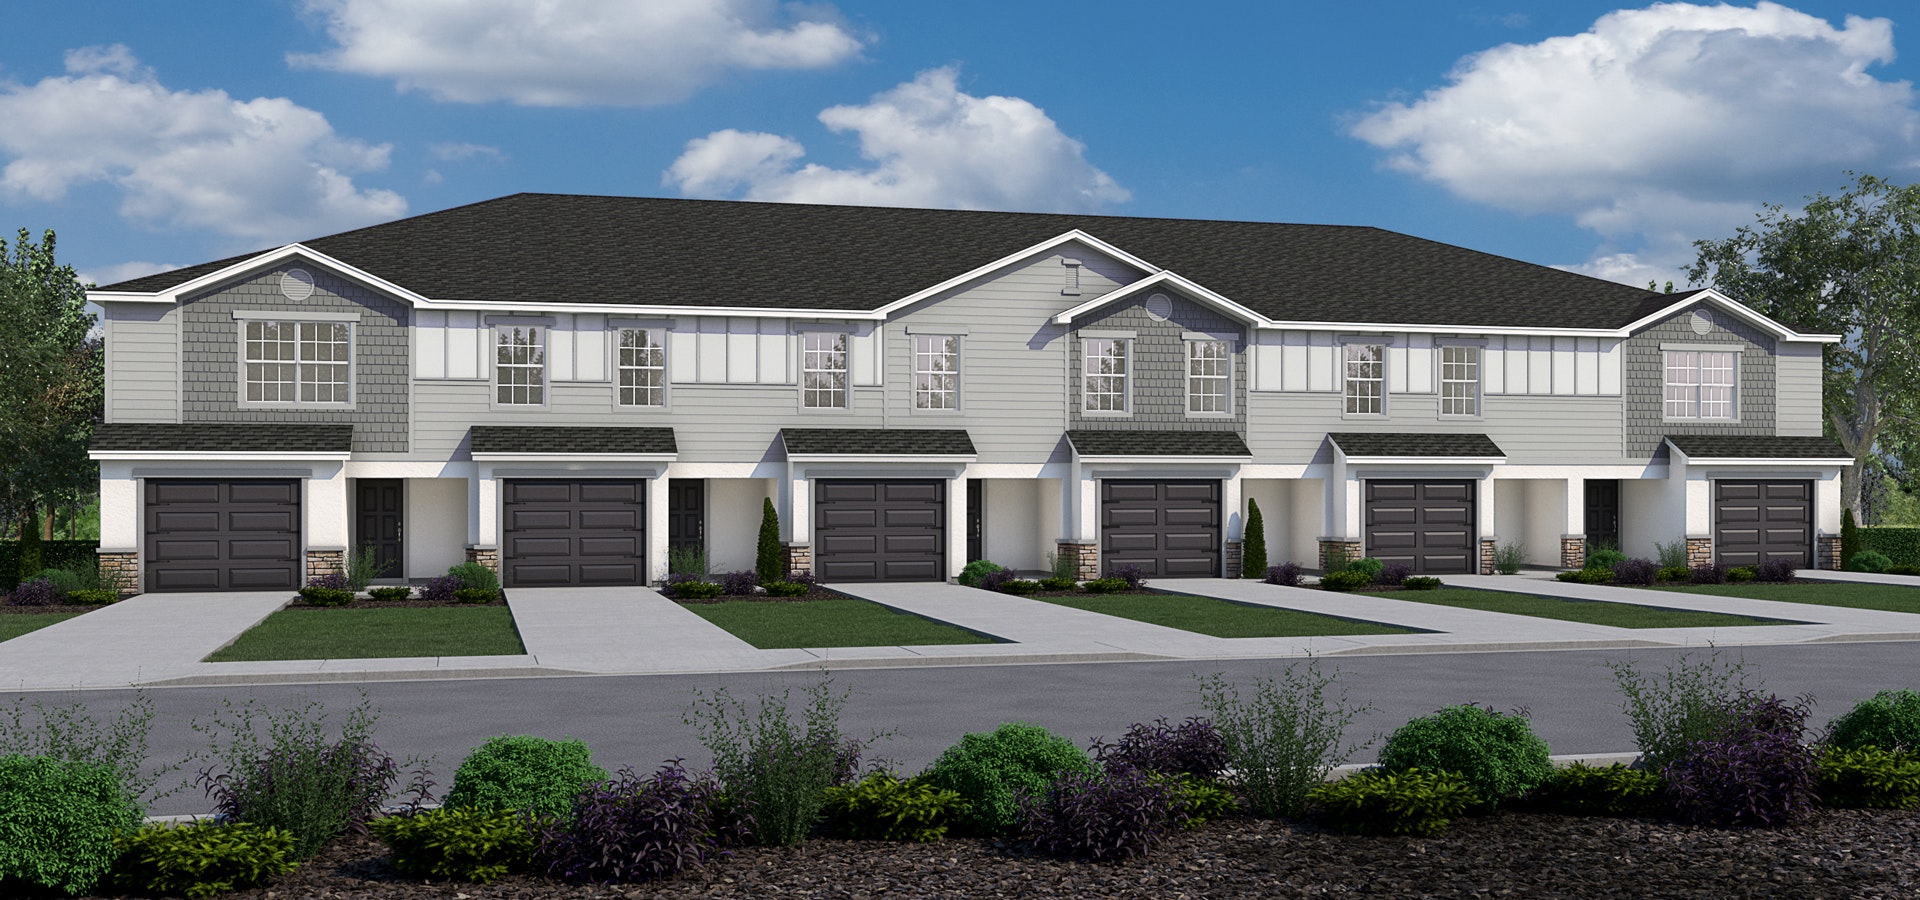 Rendering of Plant City townhomes for sale